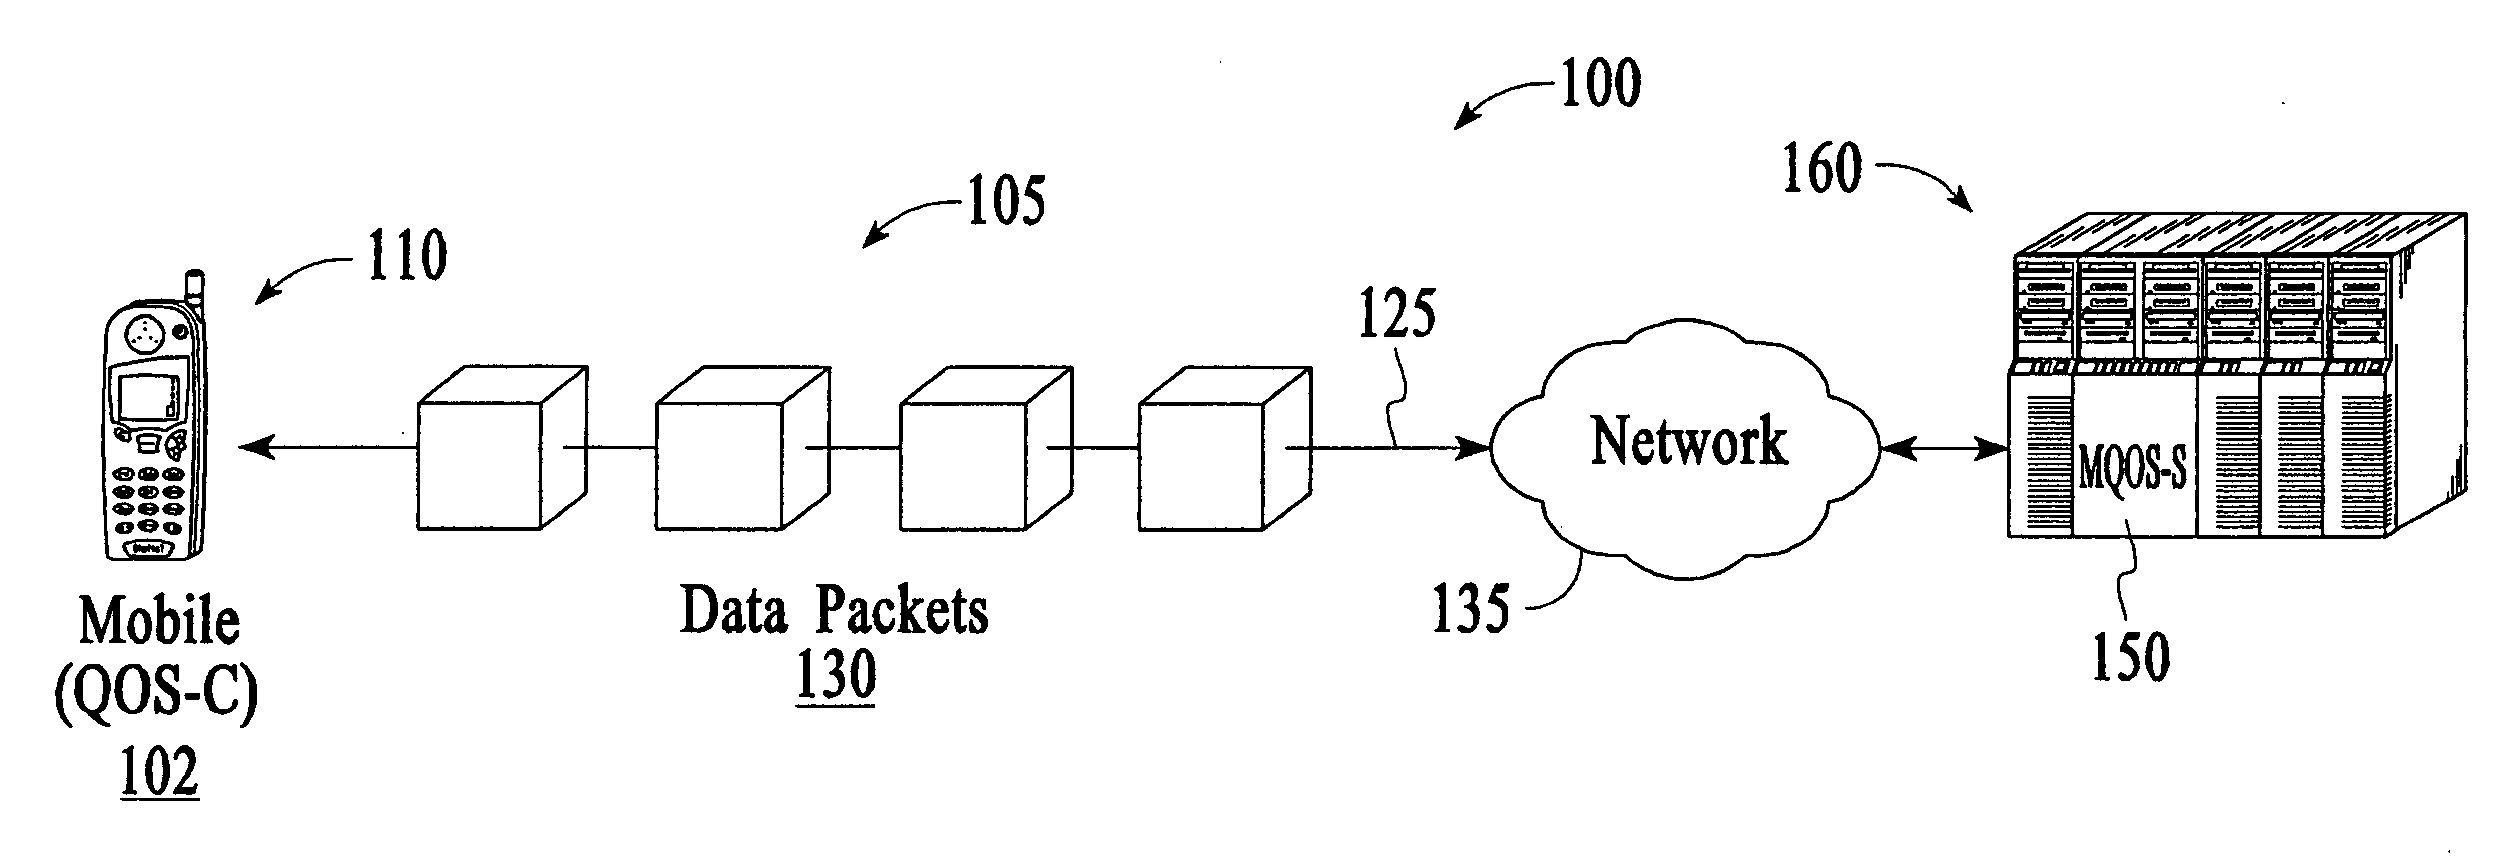 Method and system for processing quality of service (QOS) performance levels for wireless devices